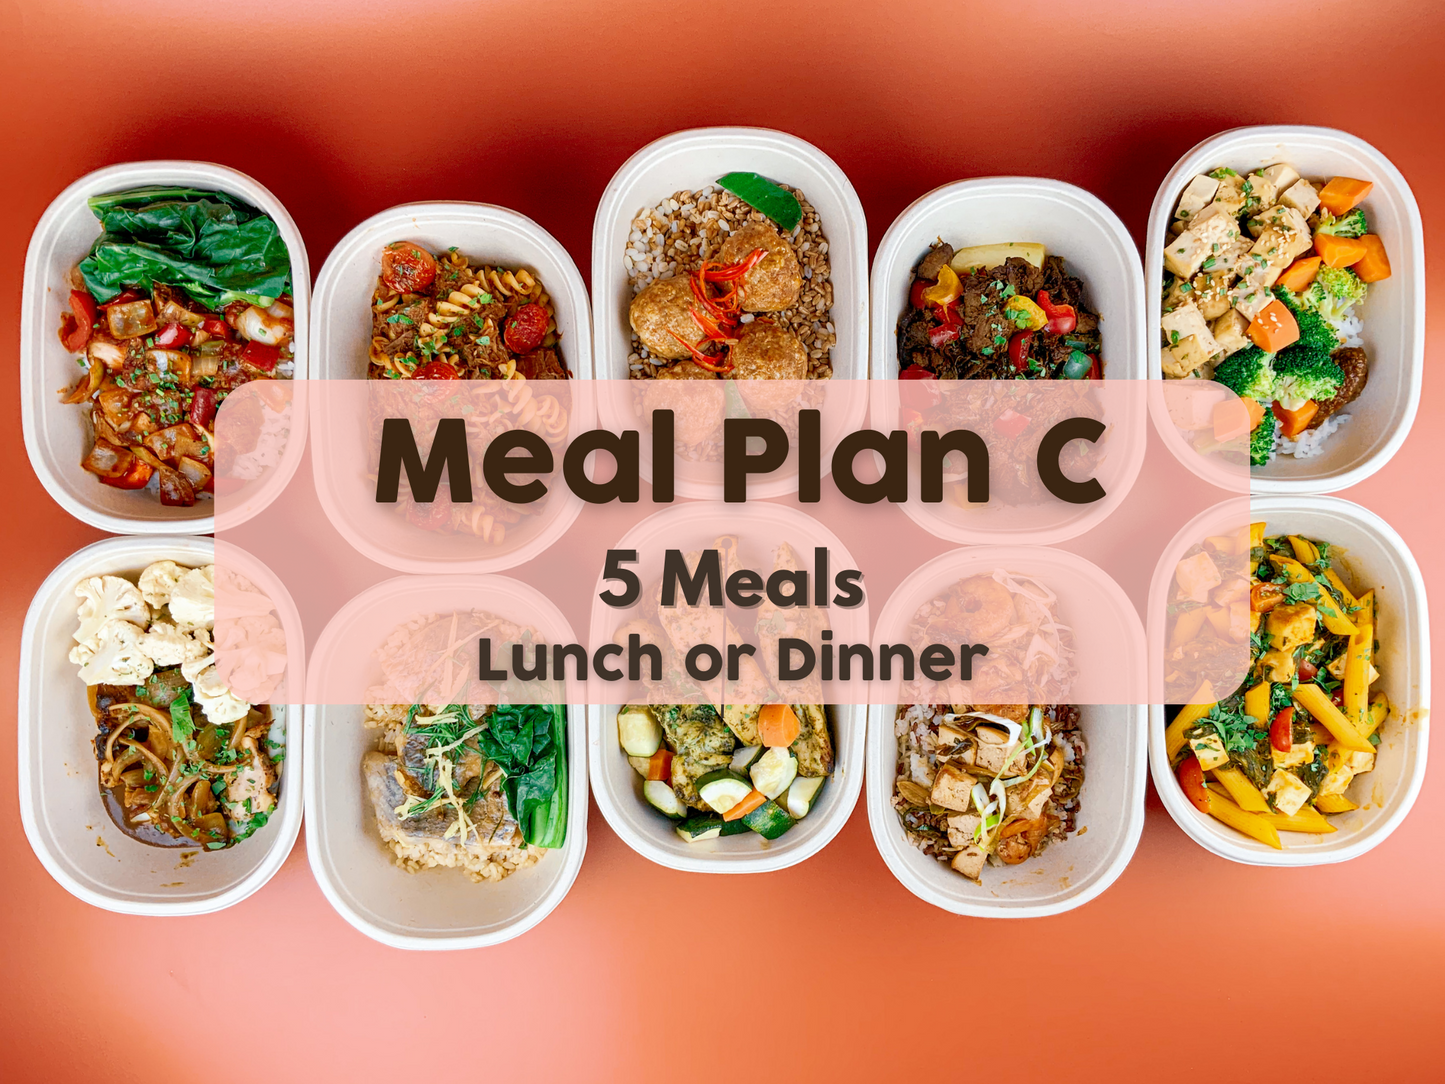 16th - 20th October Meal Plan C